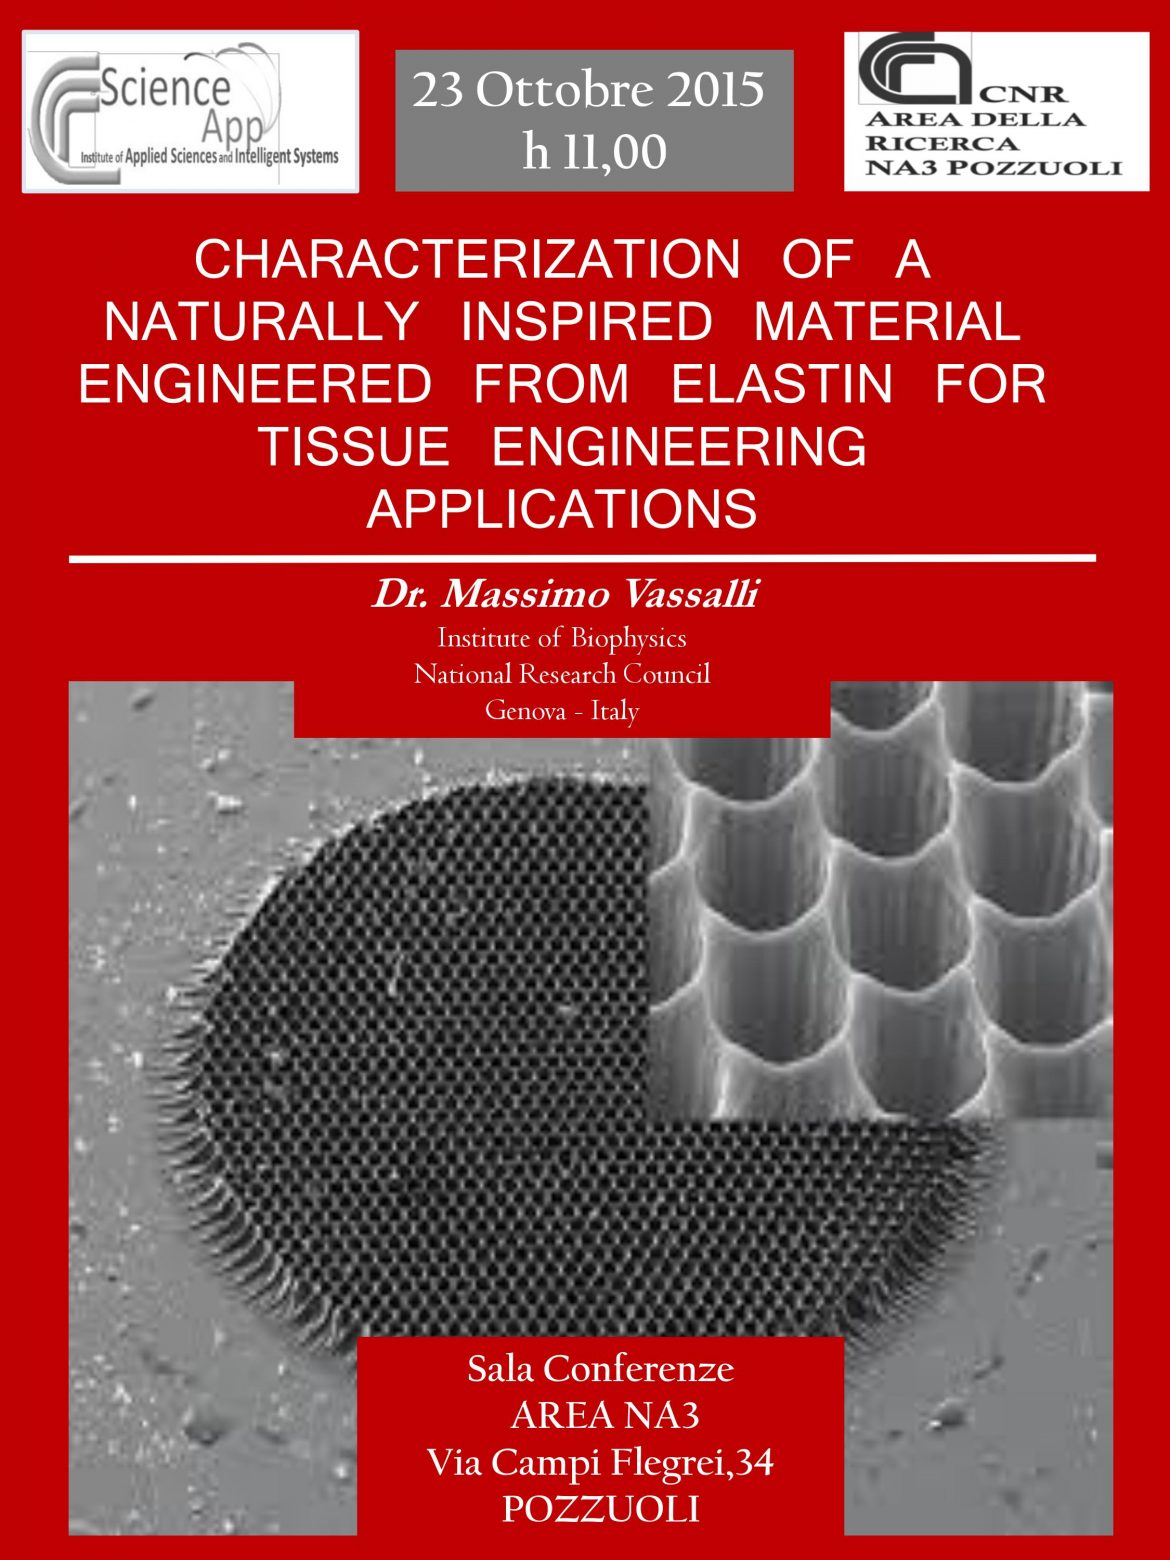 Characterization of a Naturally inspired Material Engineered from Elastin for Tissue Engineering Appliocations